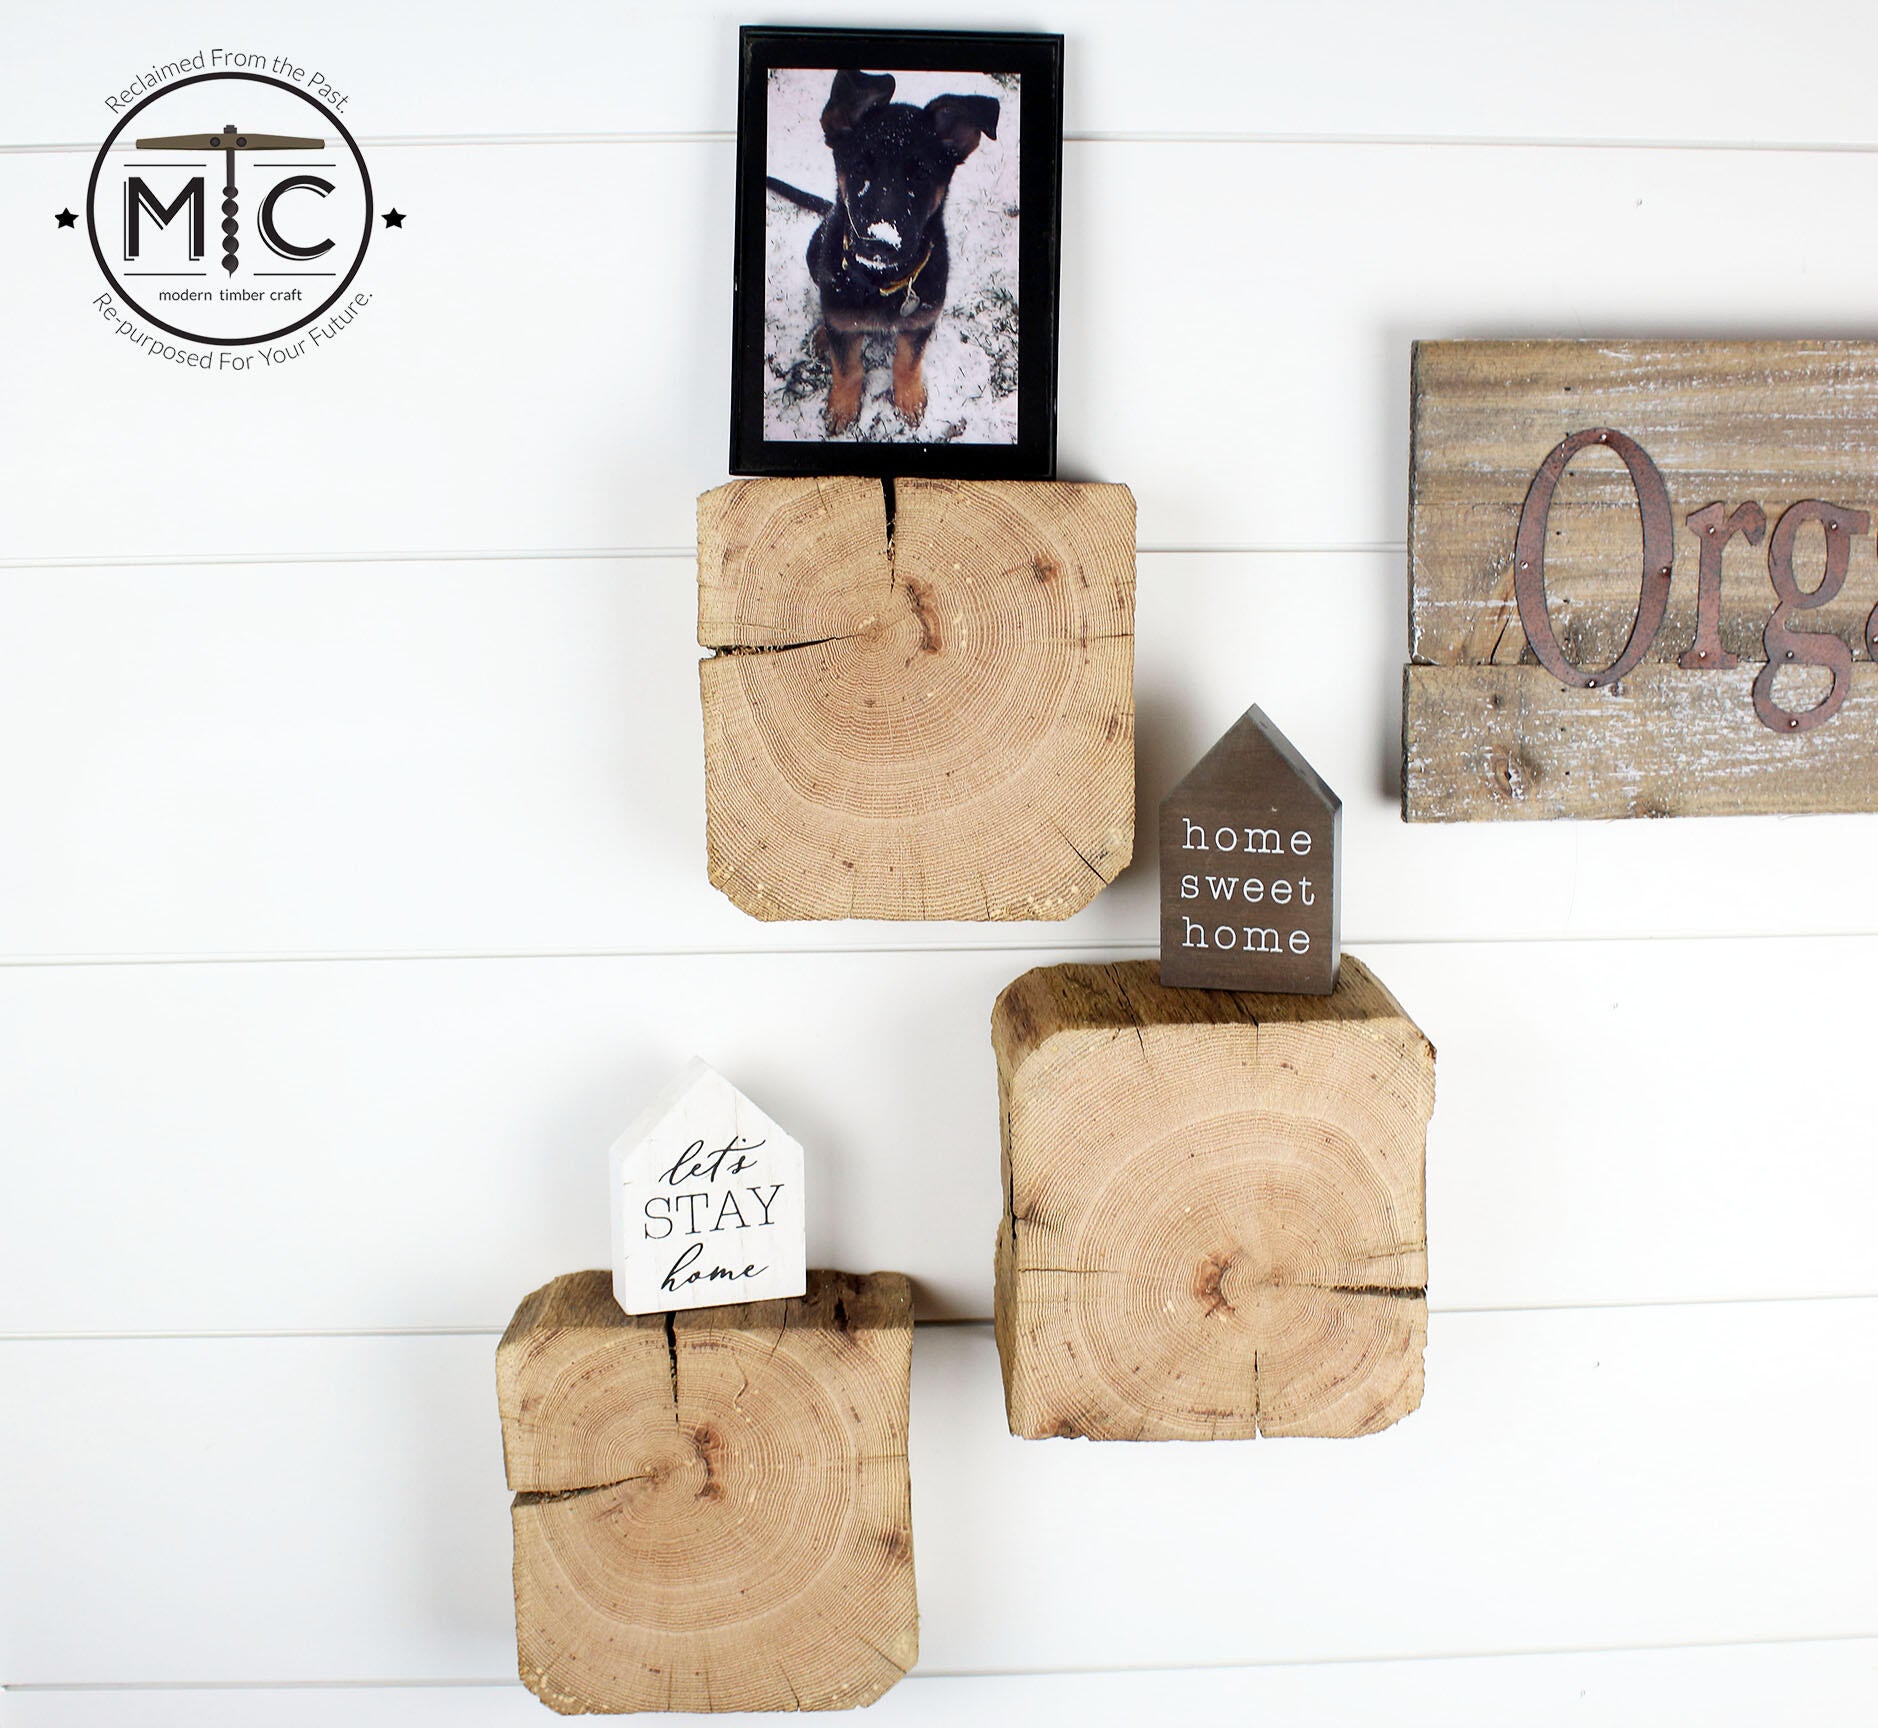 a set of three reclaimed wood wall blocks. The front facing sides are a fresh cut end displaying the growth rings and checking in the wood. The three blocks are staggered on the wall with minimal decor.